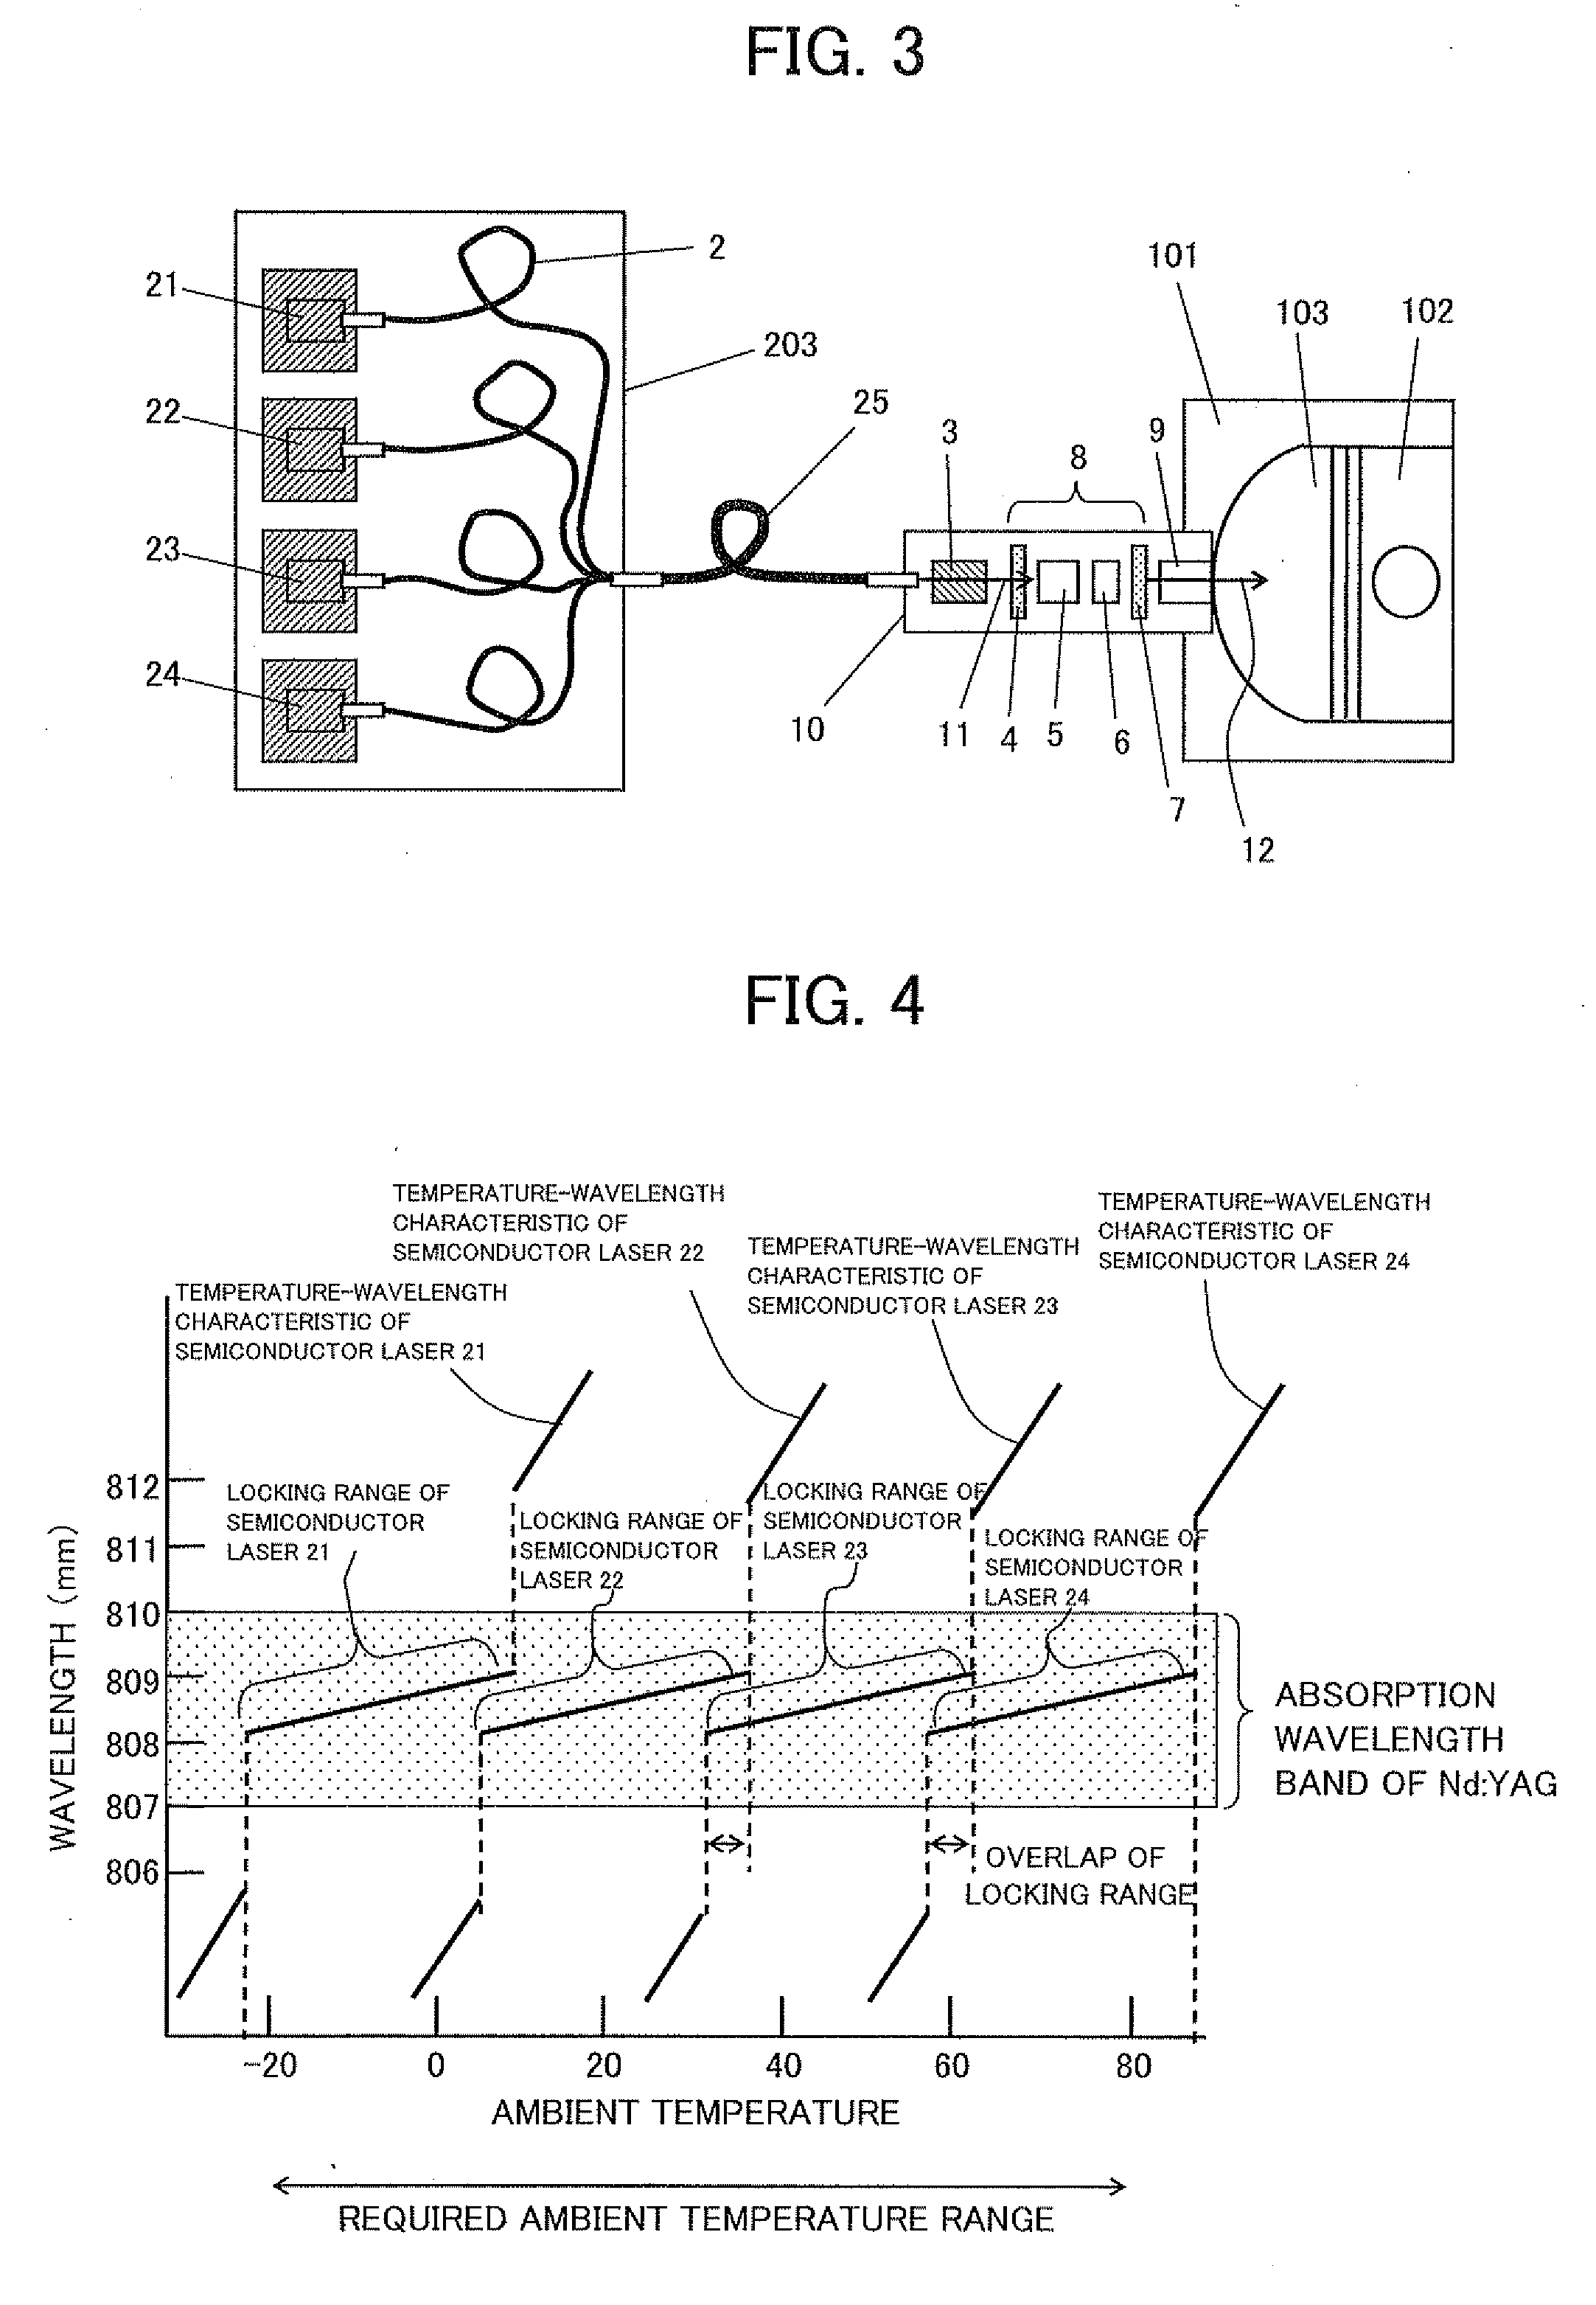 Semiconductor laser pumped solid-state laser device for engine ignition